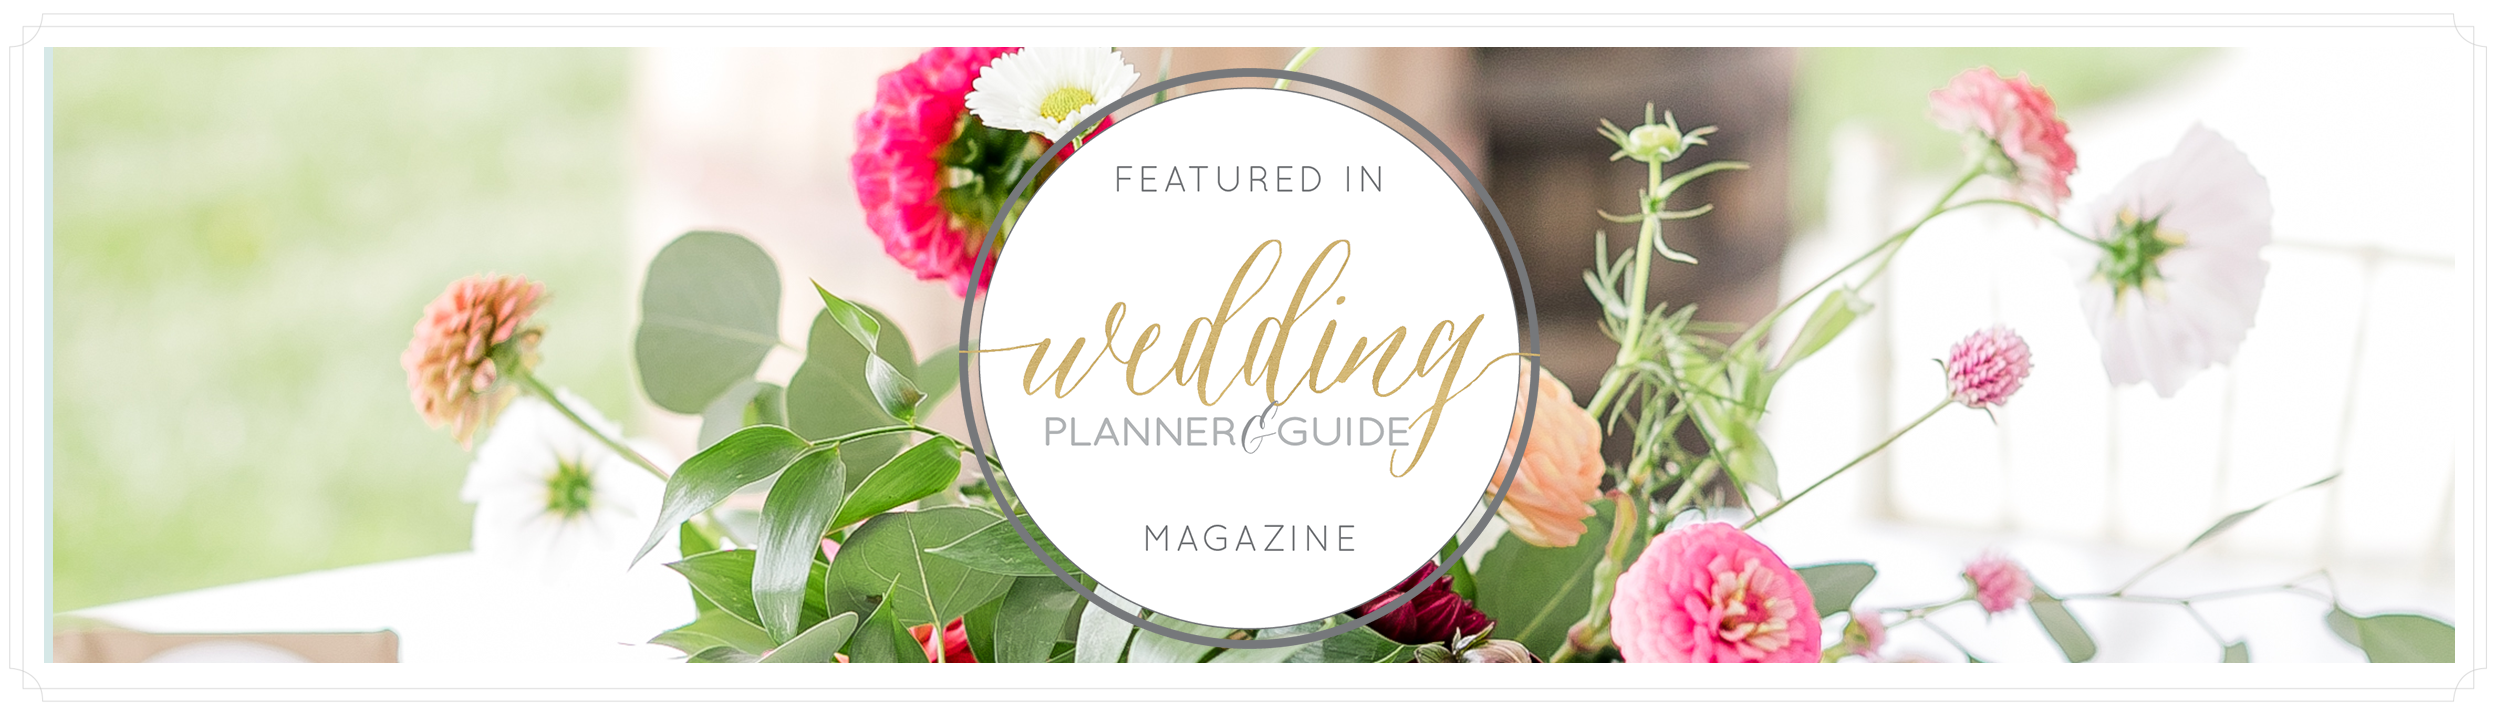 wedding_planner_guide.png